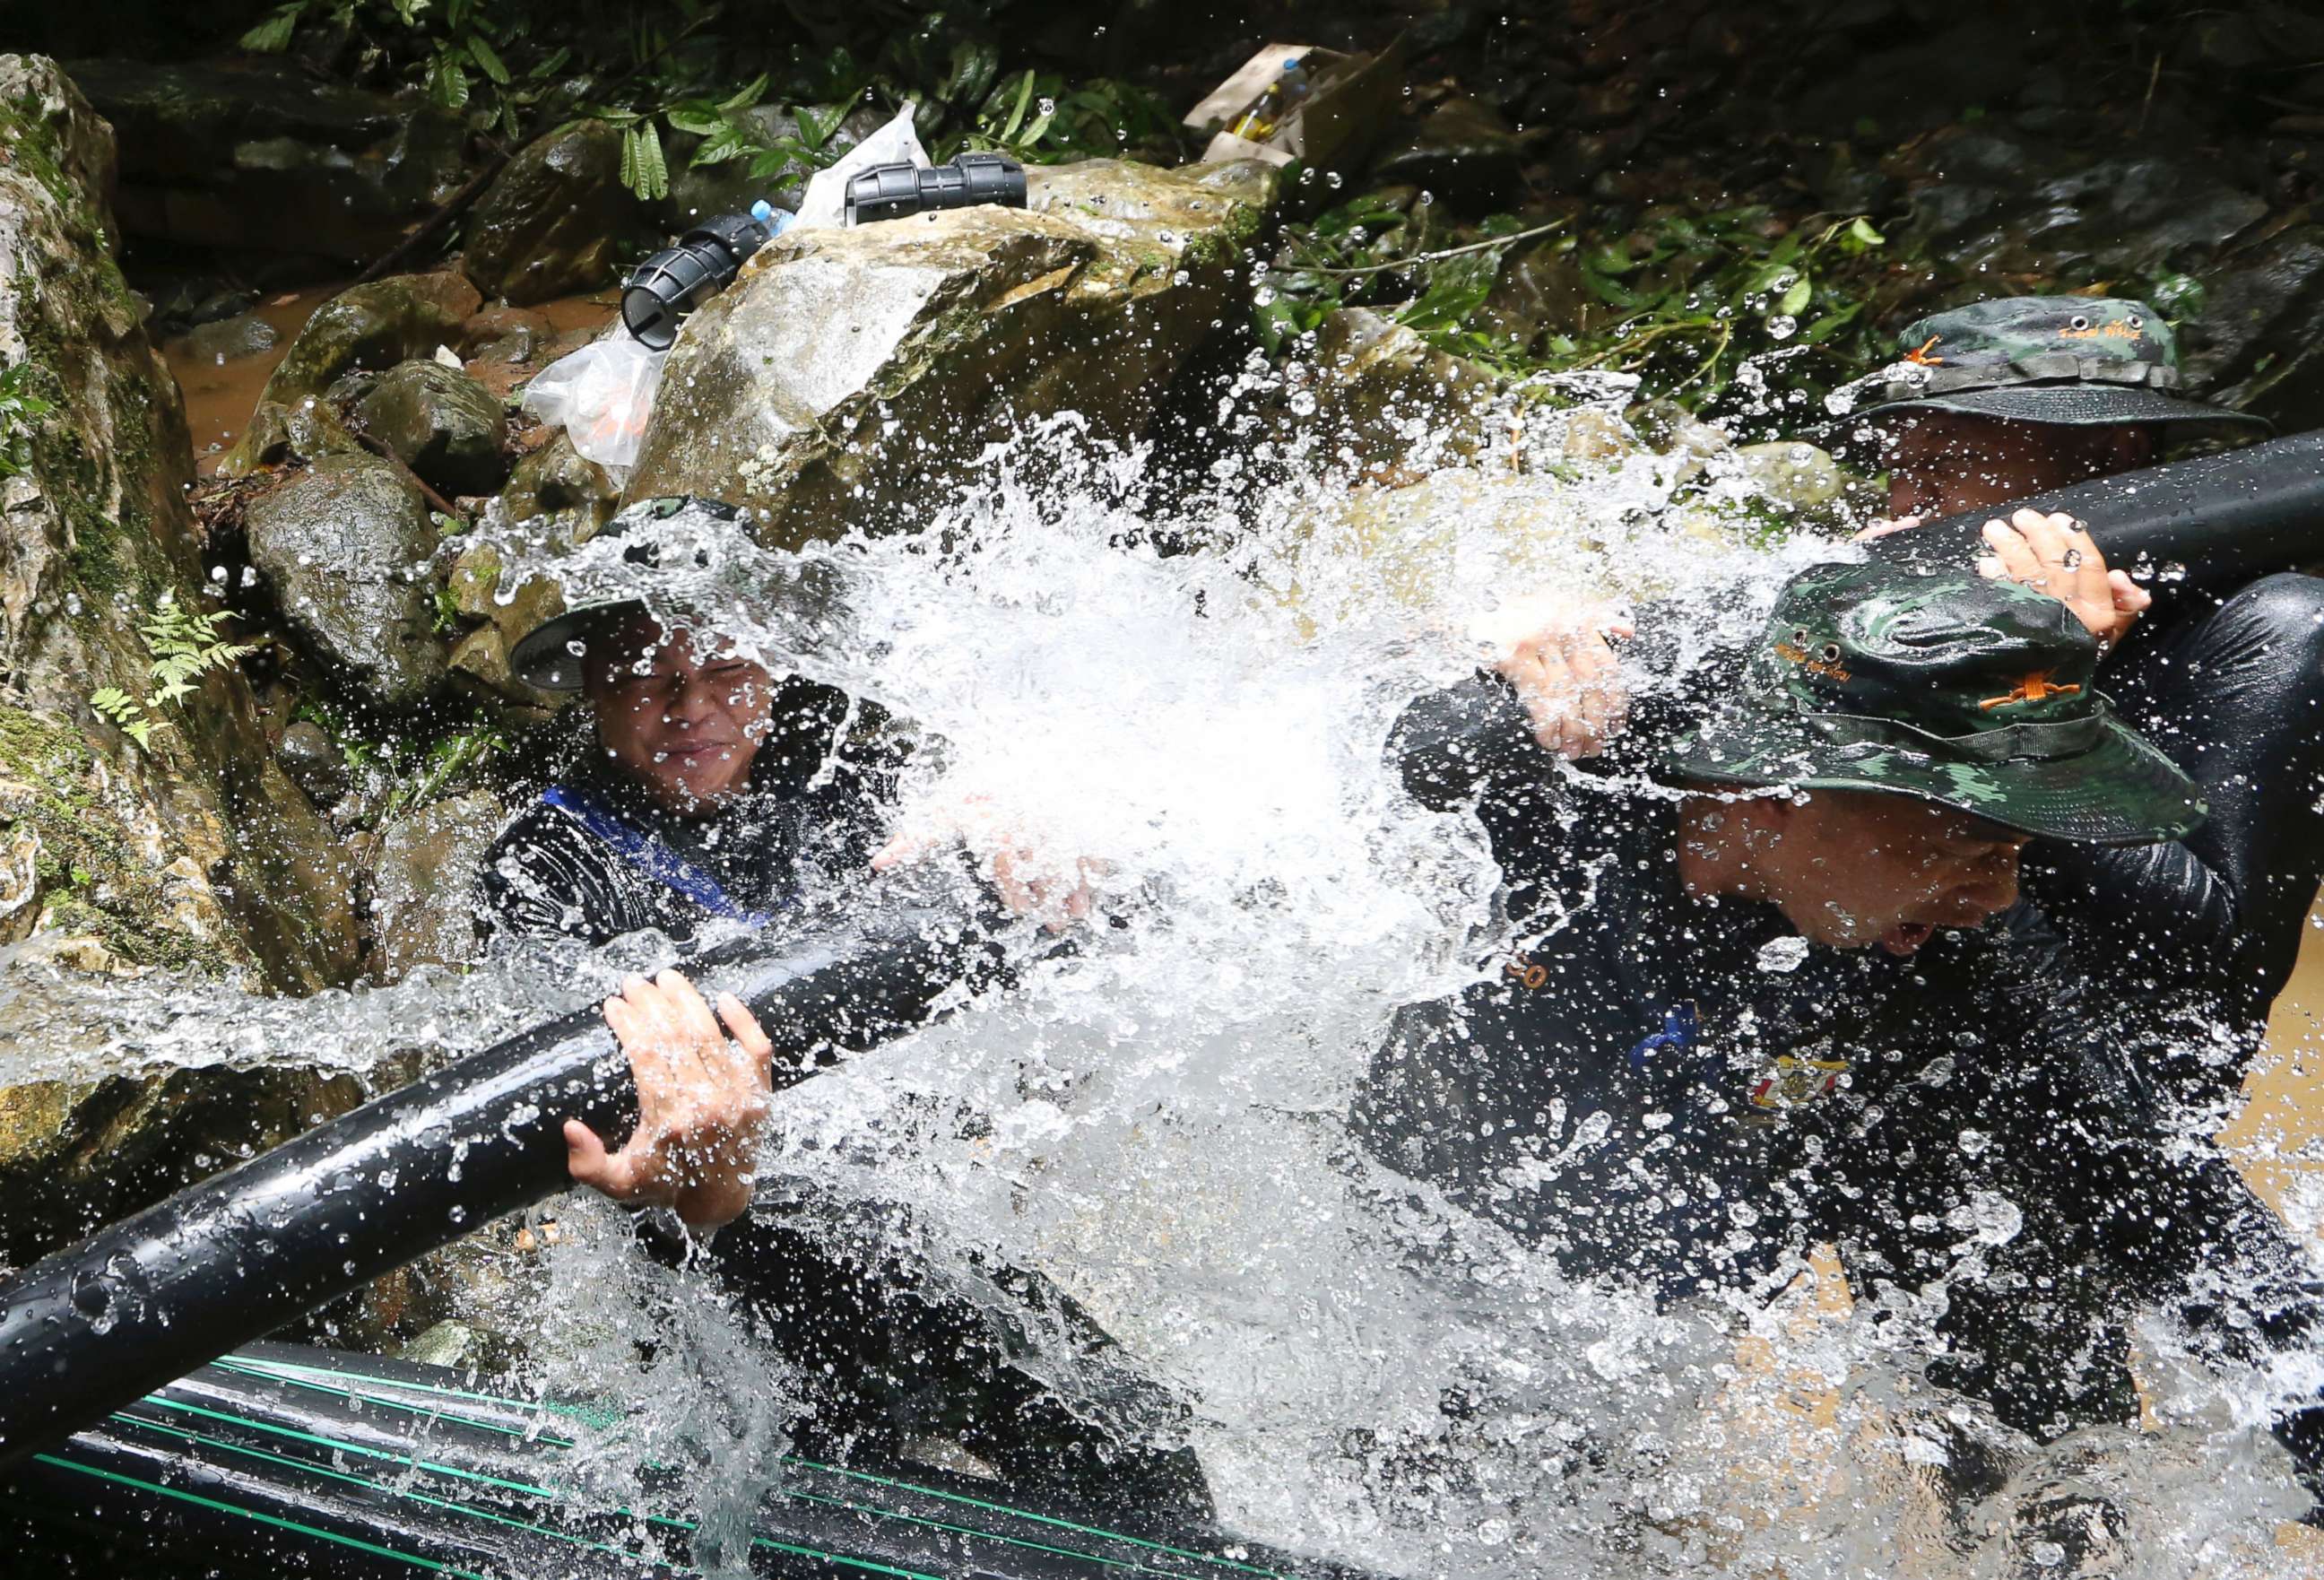 PHOTO: Thai soldiers try to connect water pipes that will help bypass water from entering a cave where 12 boys and their soccer coach have been trapped since June 23, in Mae Sai, Chiang Rai province, in northern Thailand, July 7, 2018. 